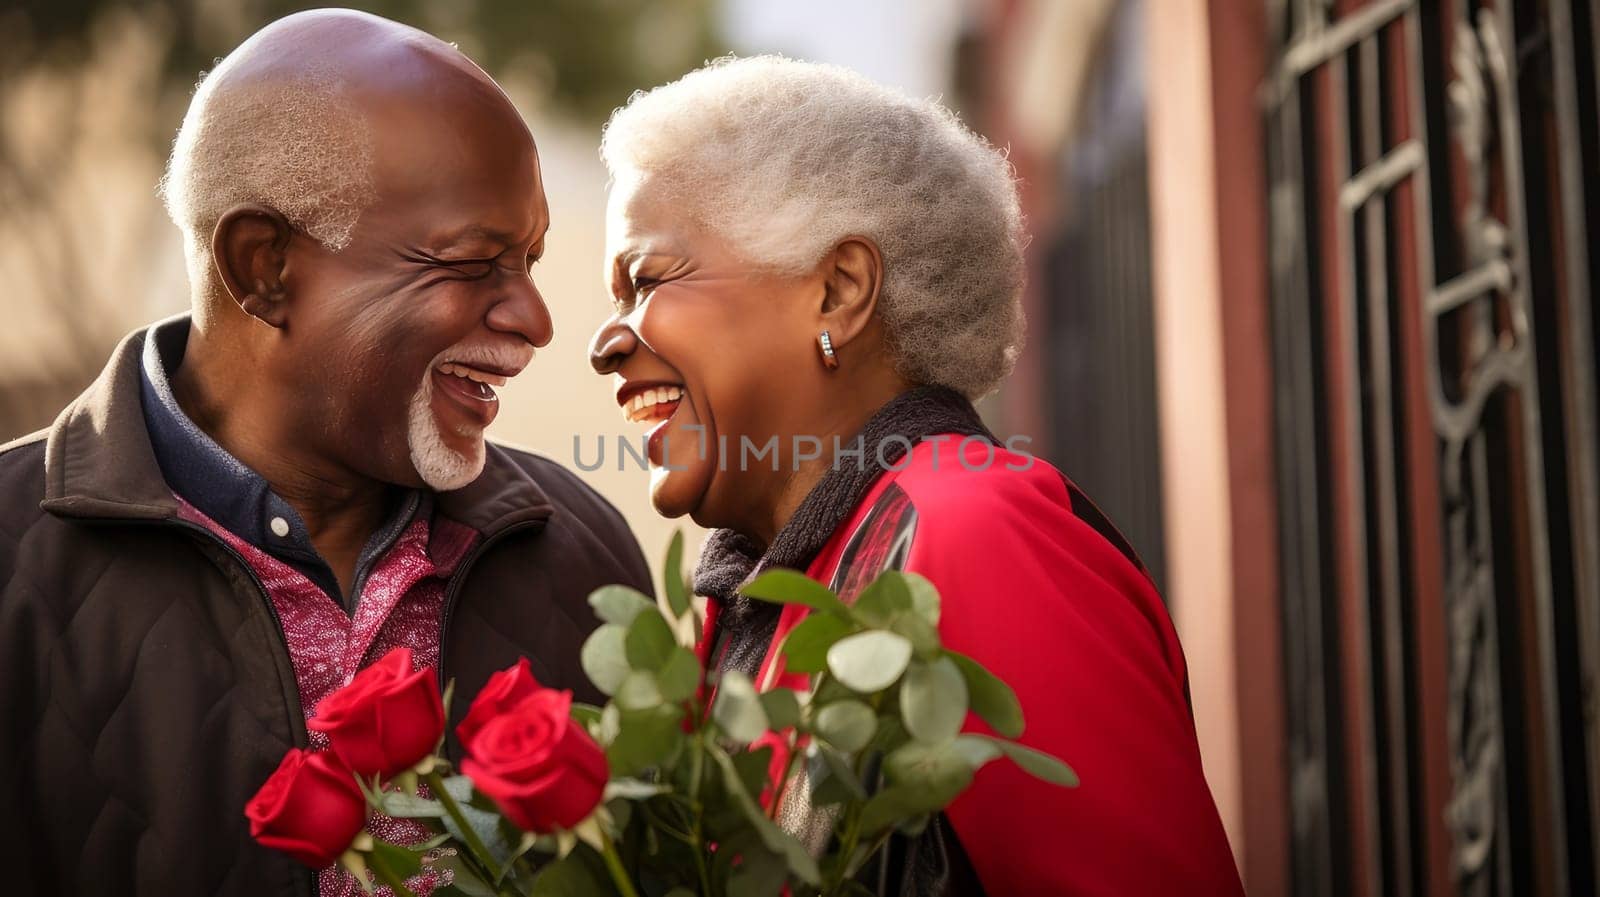 An elderly African man gives his wife a large bouquet of roses for Valentine's Day Valentine's day, newlyweds, engagement, holiday, birthday, wedding, anniversary, surprise, date.